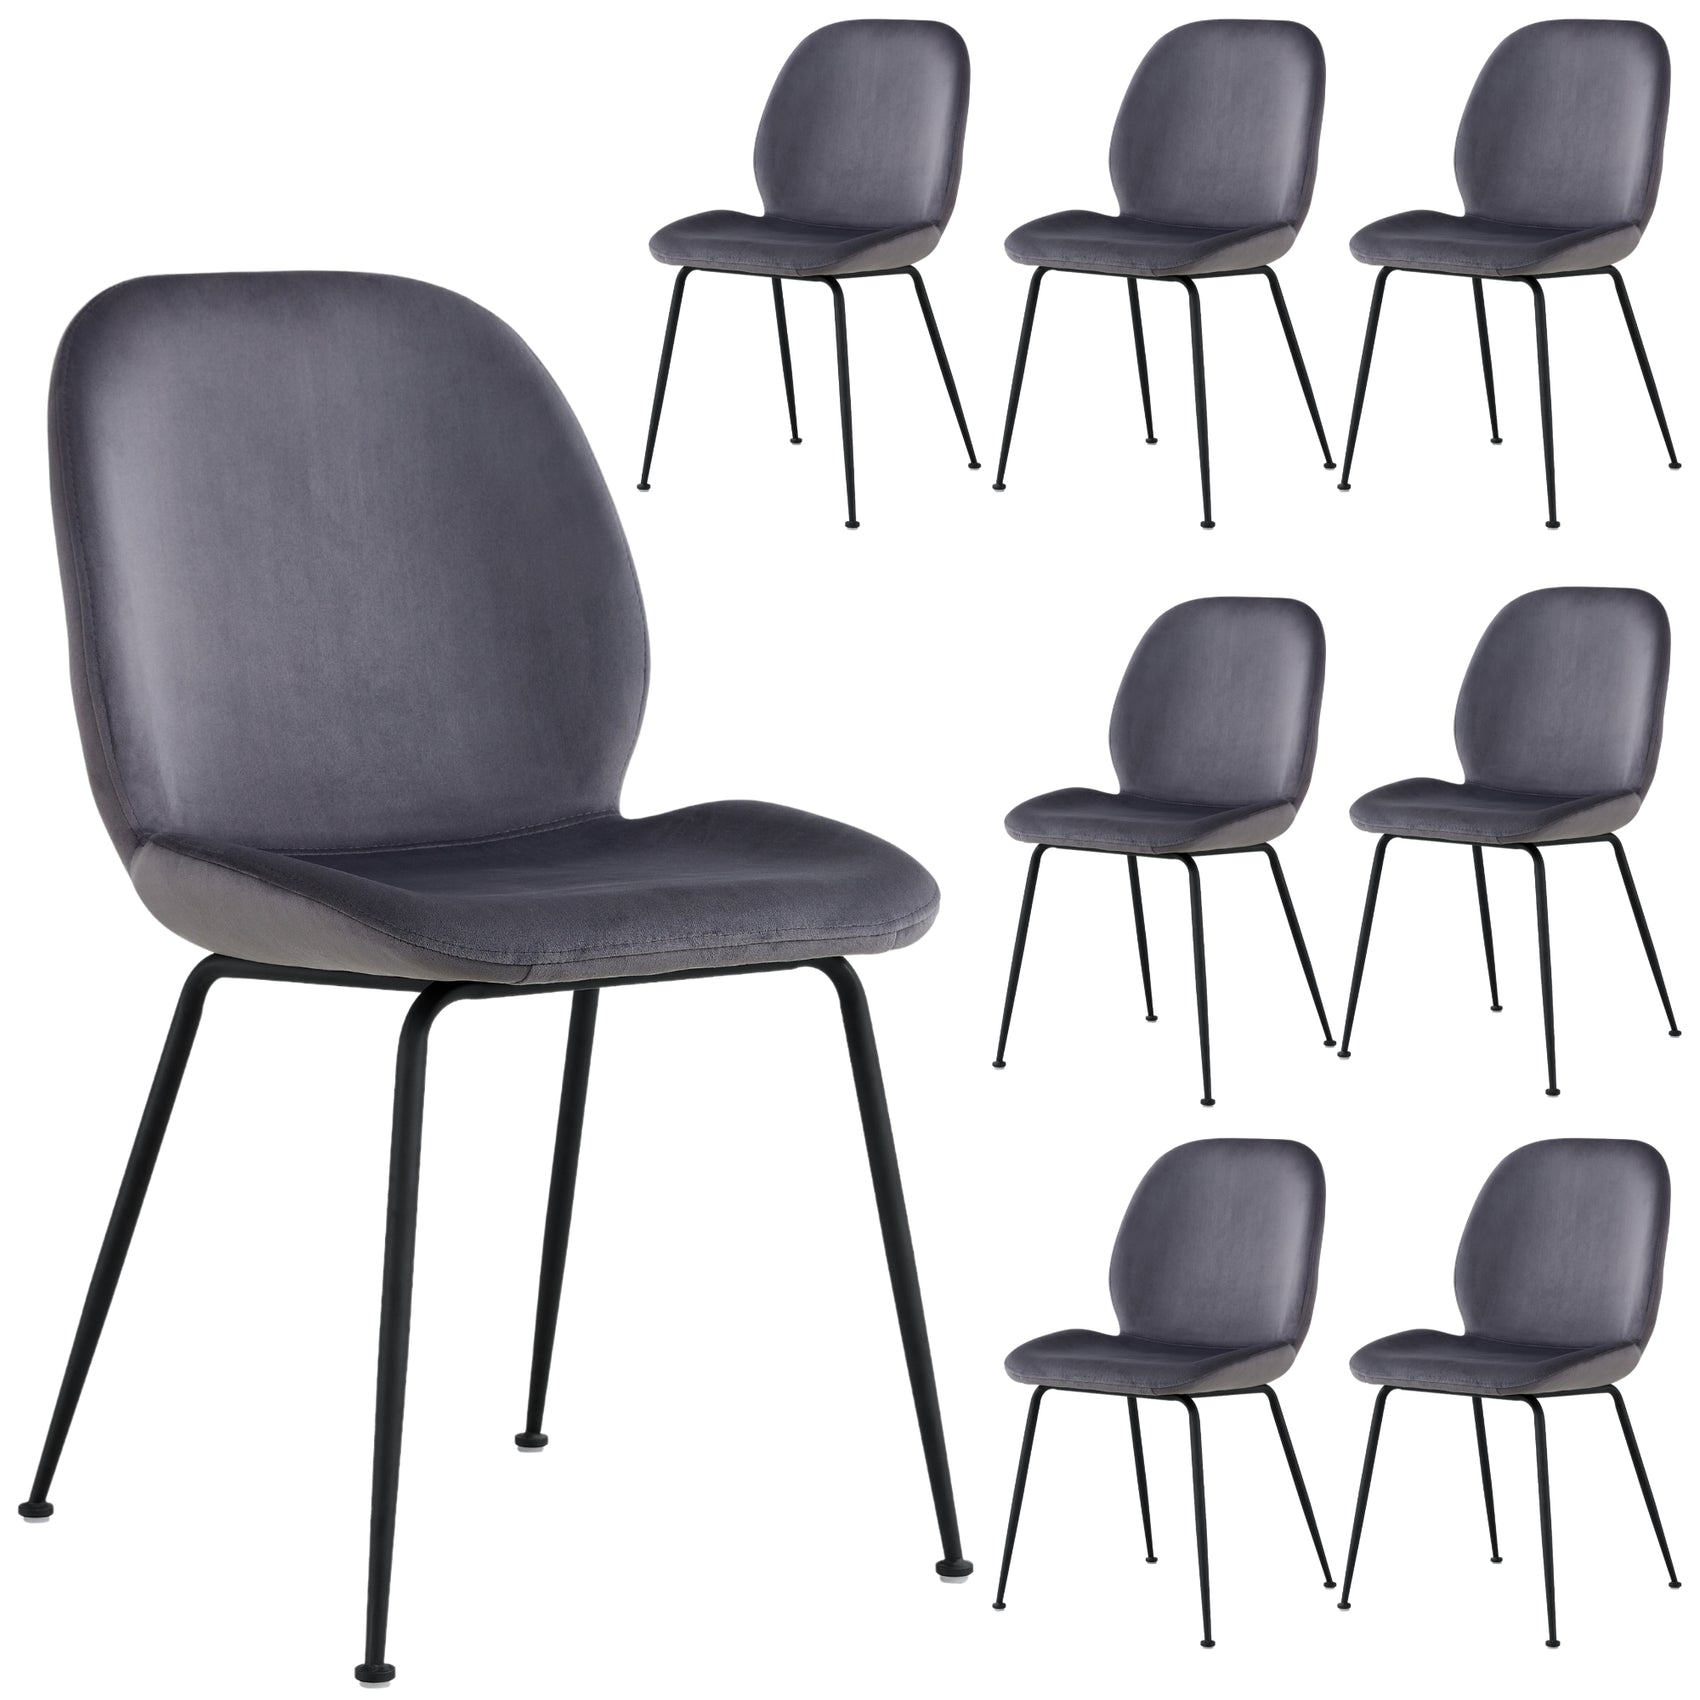 Remy Dining Chair Set of 8 Fabric Seat with Metal Frame - Charcoal